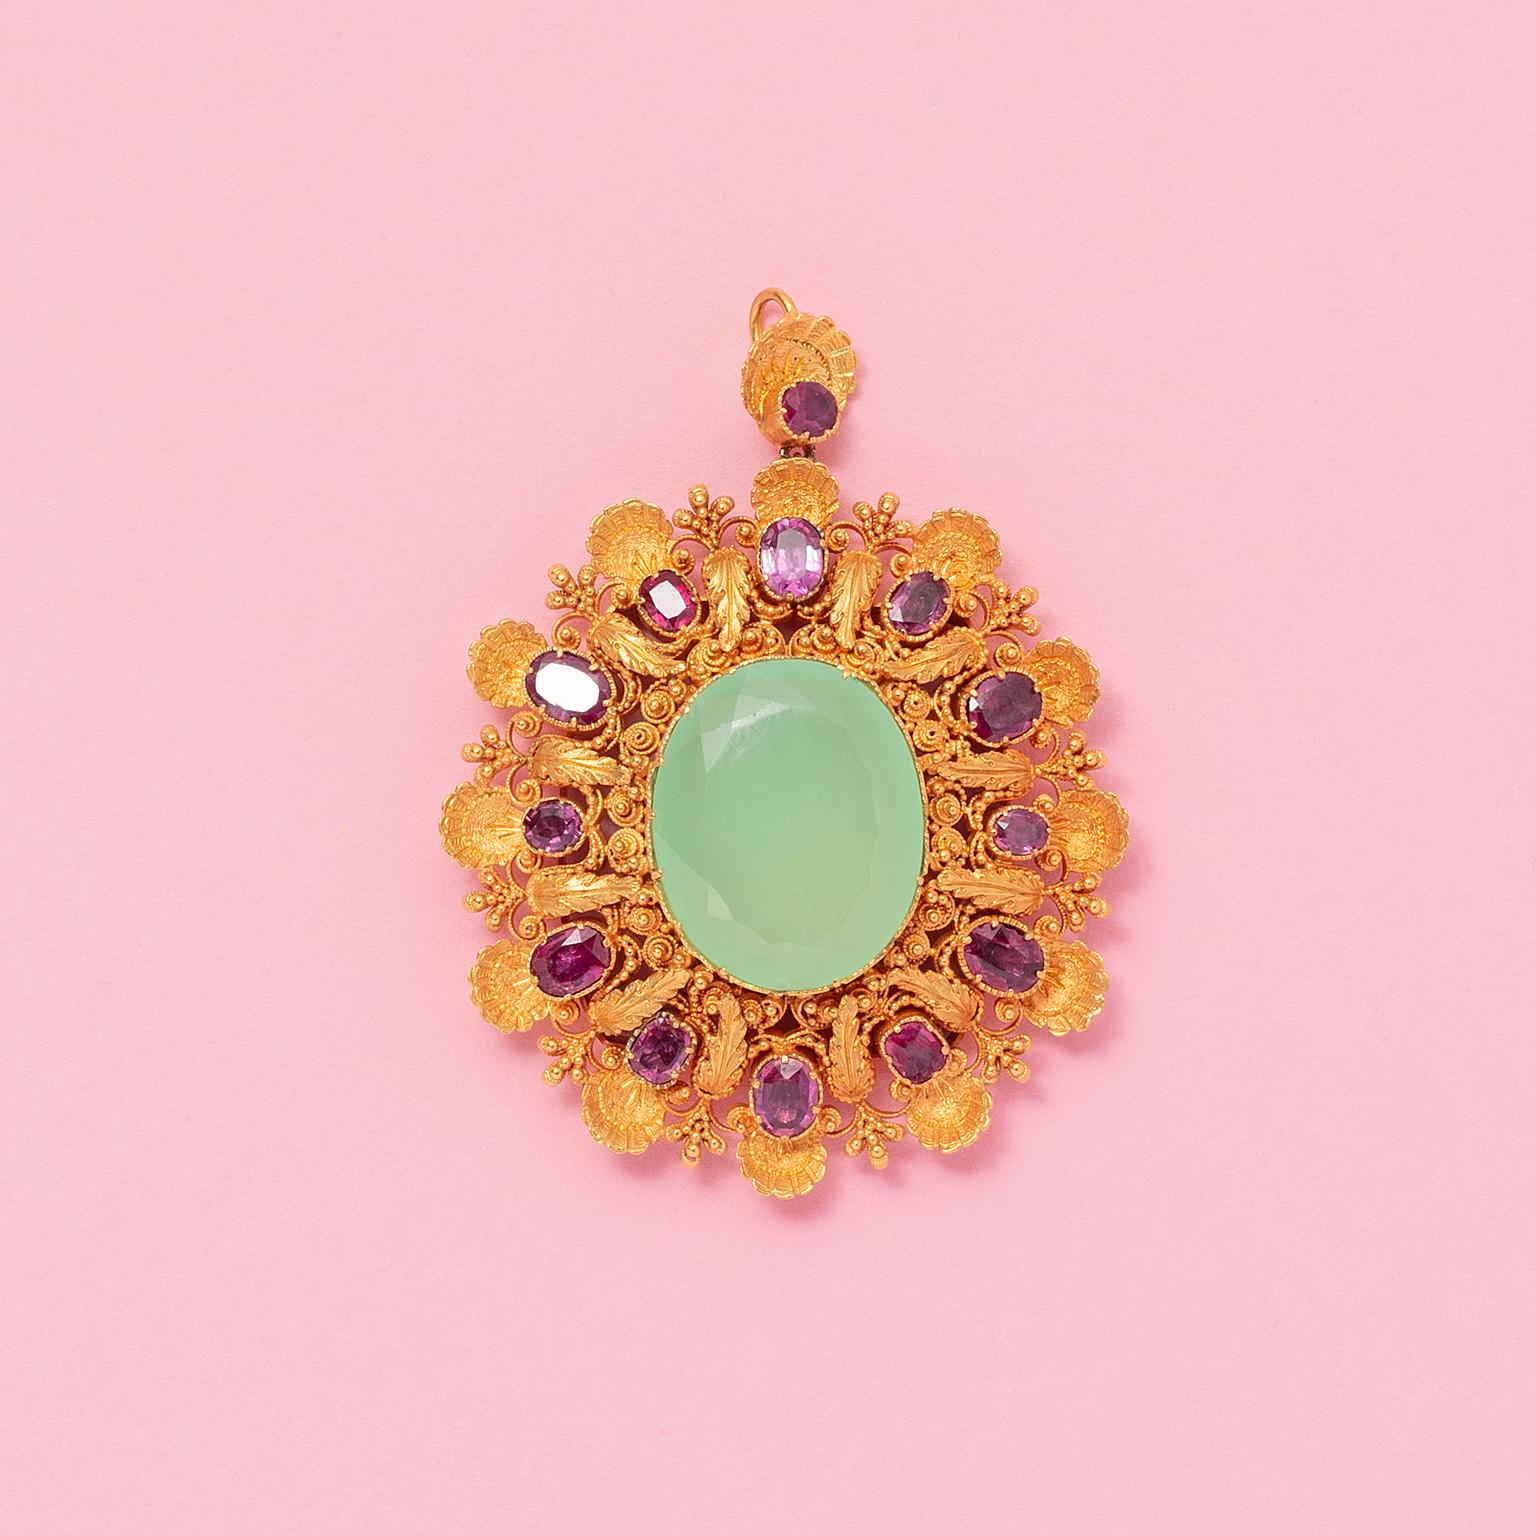 A large 18 carat yellow gold, oval flower shaped pendant set with a large oval-facetted chrysophrase. surrounded by twelve oval-facetted pink-red rubies, alternating small and bigger. All richly decorated with filigrain, grains, gold leaves and gold